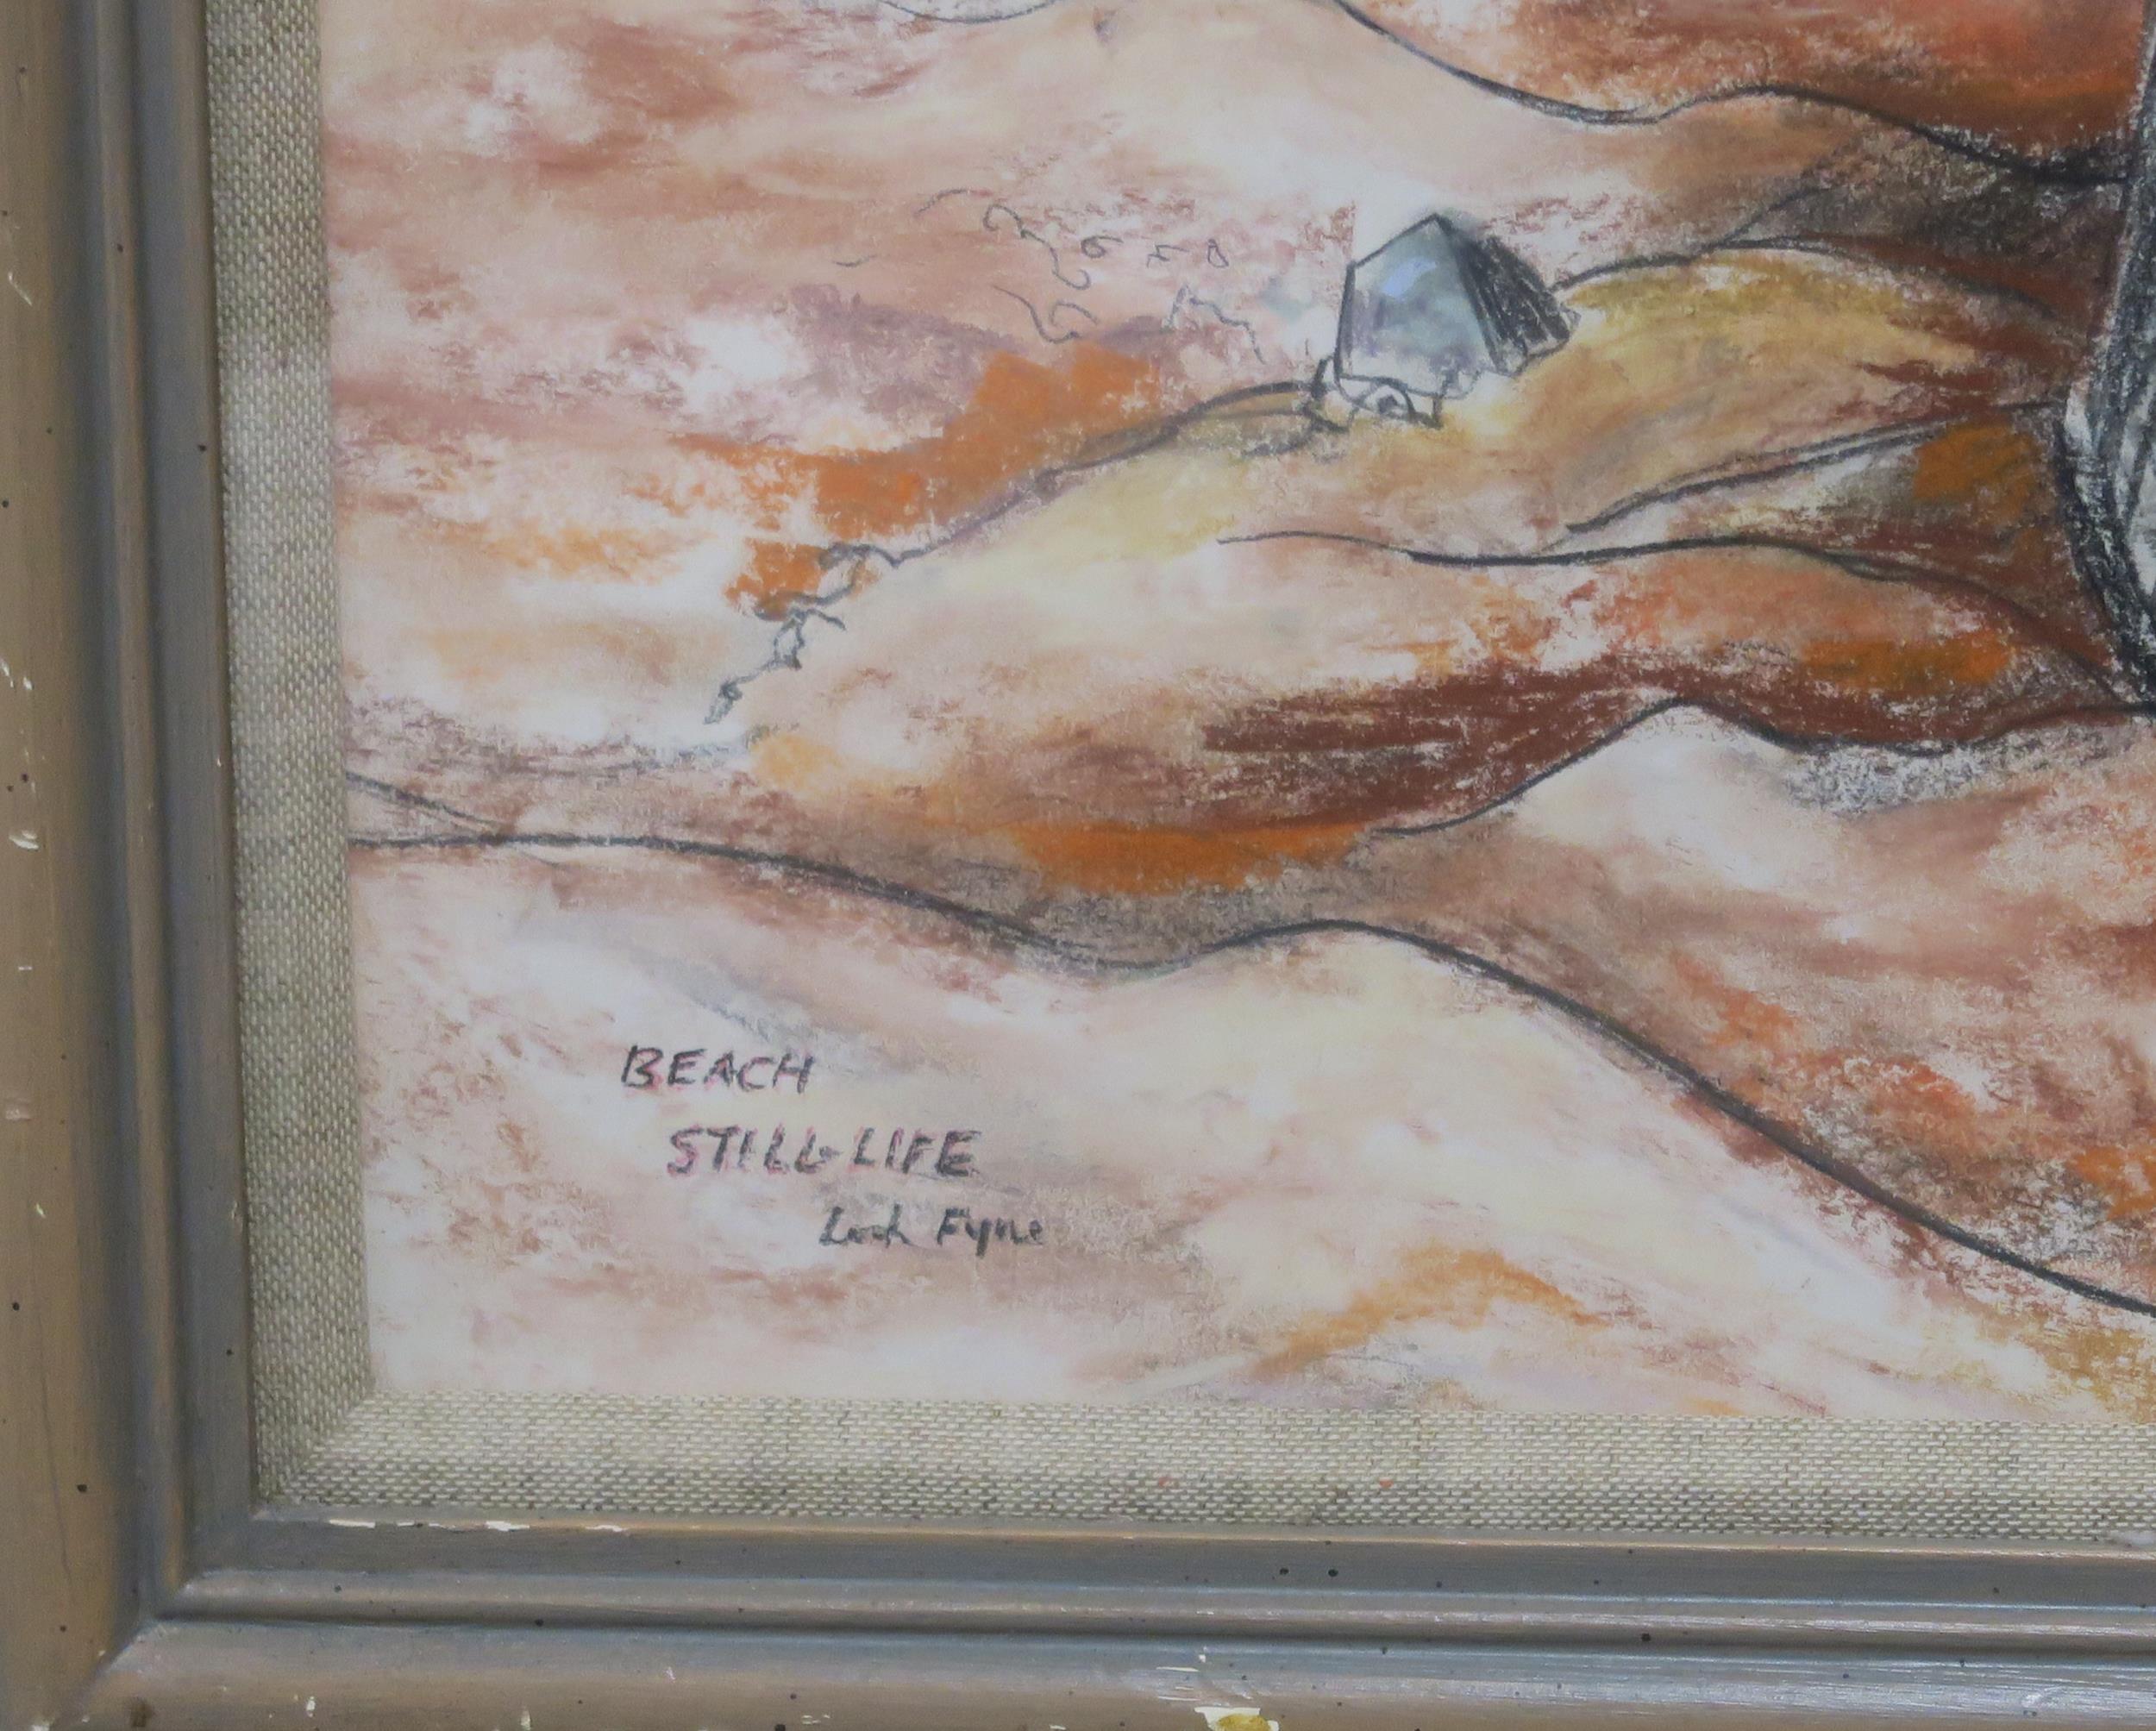 LOUISE GIBSON ANNAND MBE (1915-2012) STILL LIFE ON BEACH, LOCH FYNE Conte and pastel, signed lower - Image 4 of 4